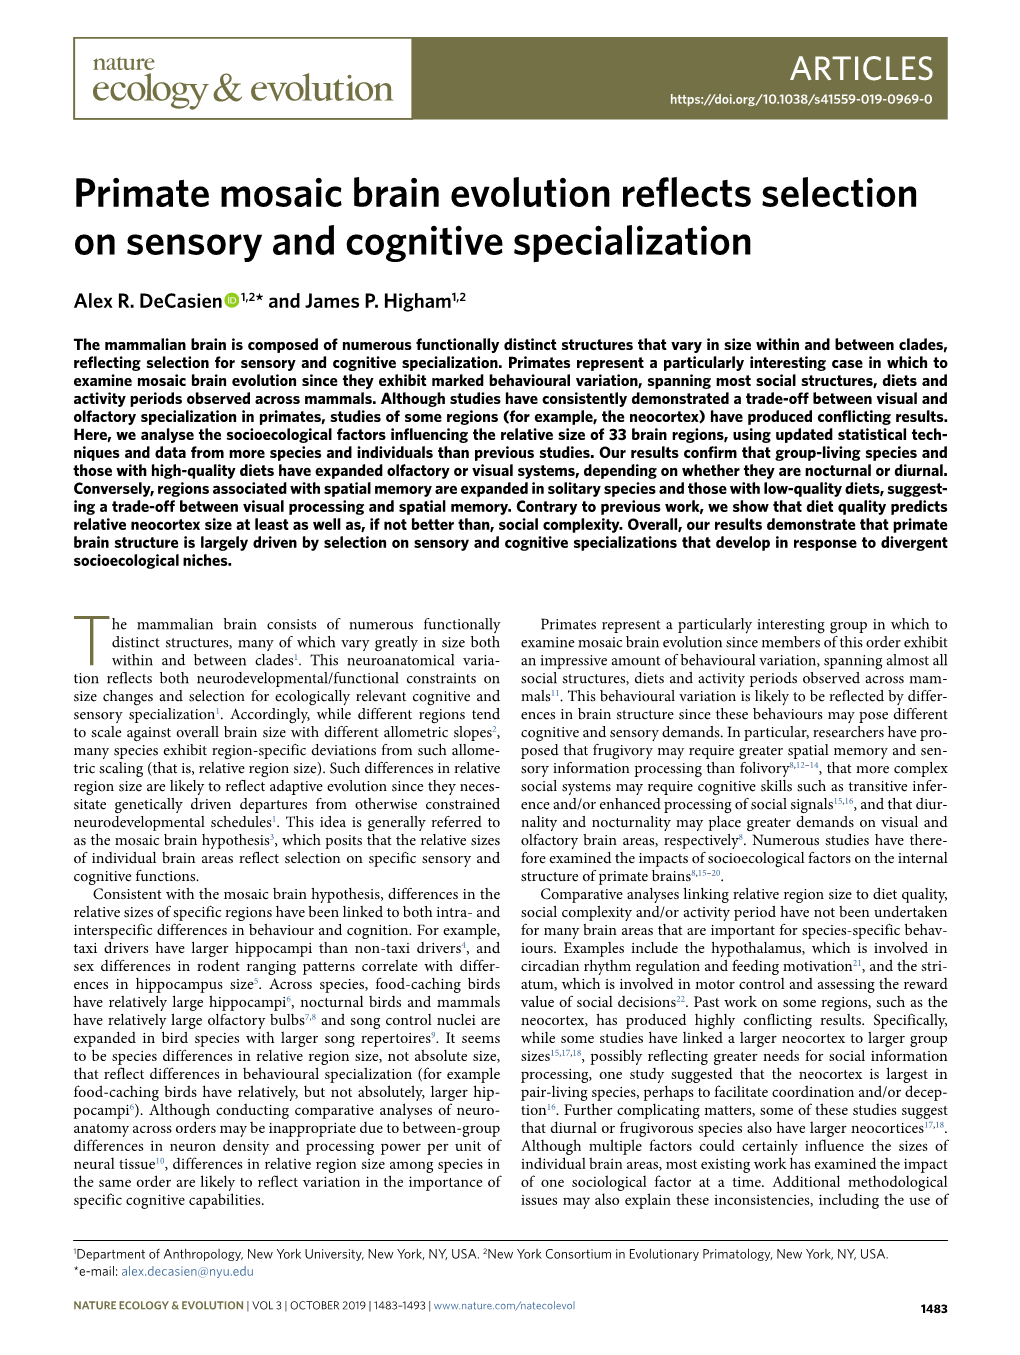 Primate Mosaic Brain Evolution Reflects Selection on Sensory and Cognitive Specialization